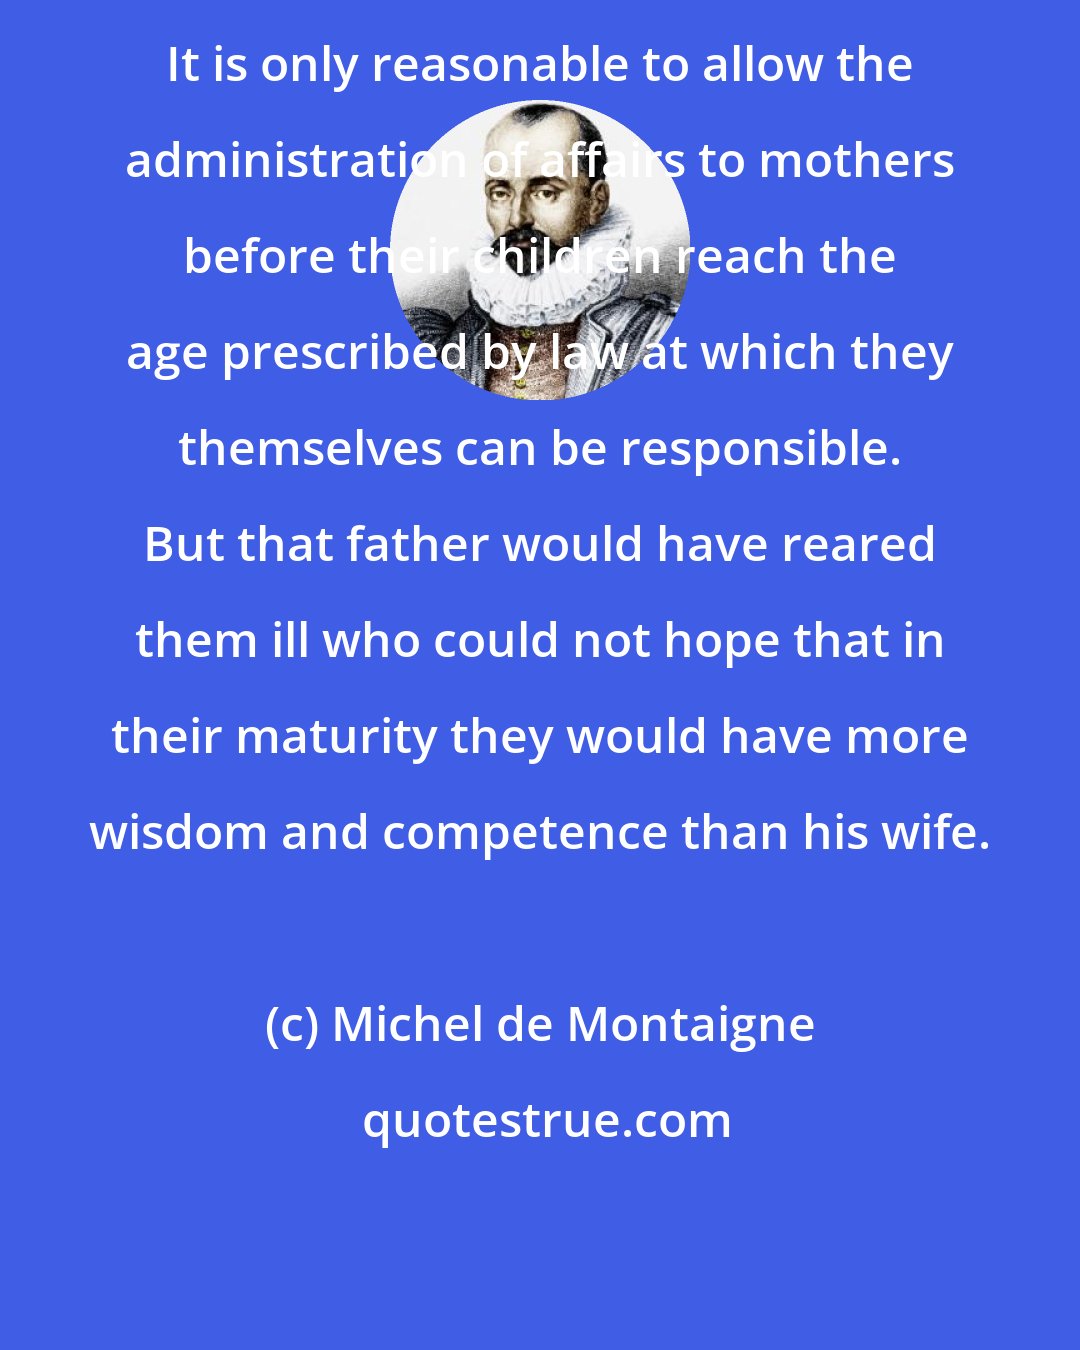 Michel de Montaigne: It is only reasonable to allow the administration of affairs to mothers before their children reach the age prescribed by law at which they themselves can be responsible. But that father would have reared them ill who could not hope that in their maturity they would have more wisdom and competence than his wife.